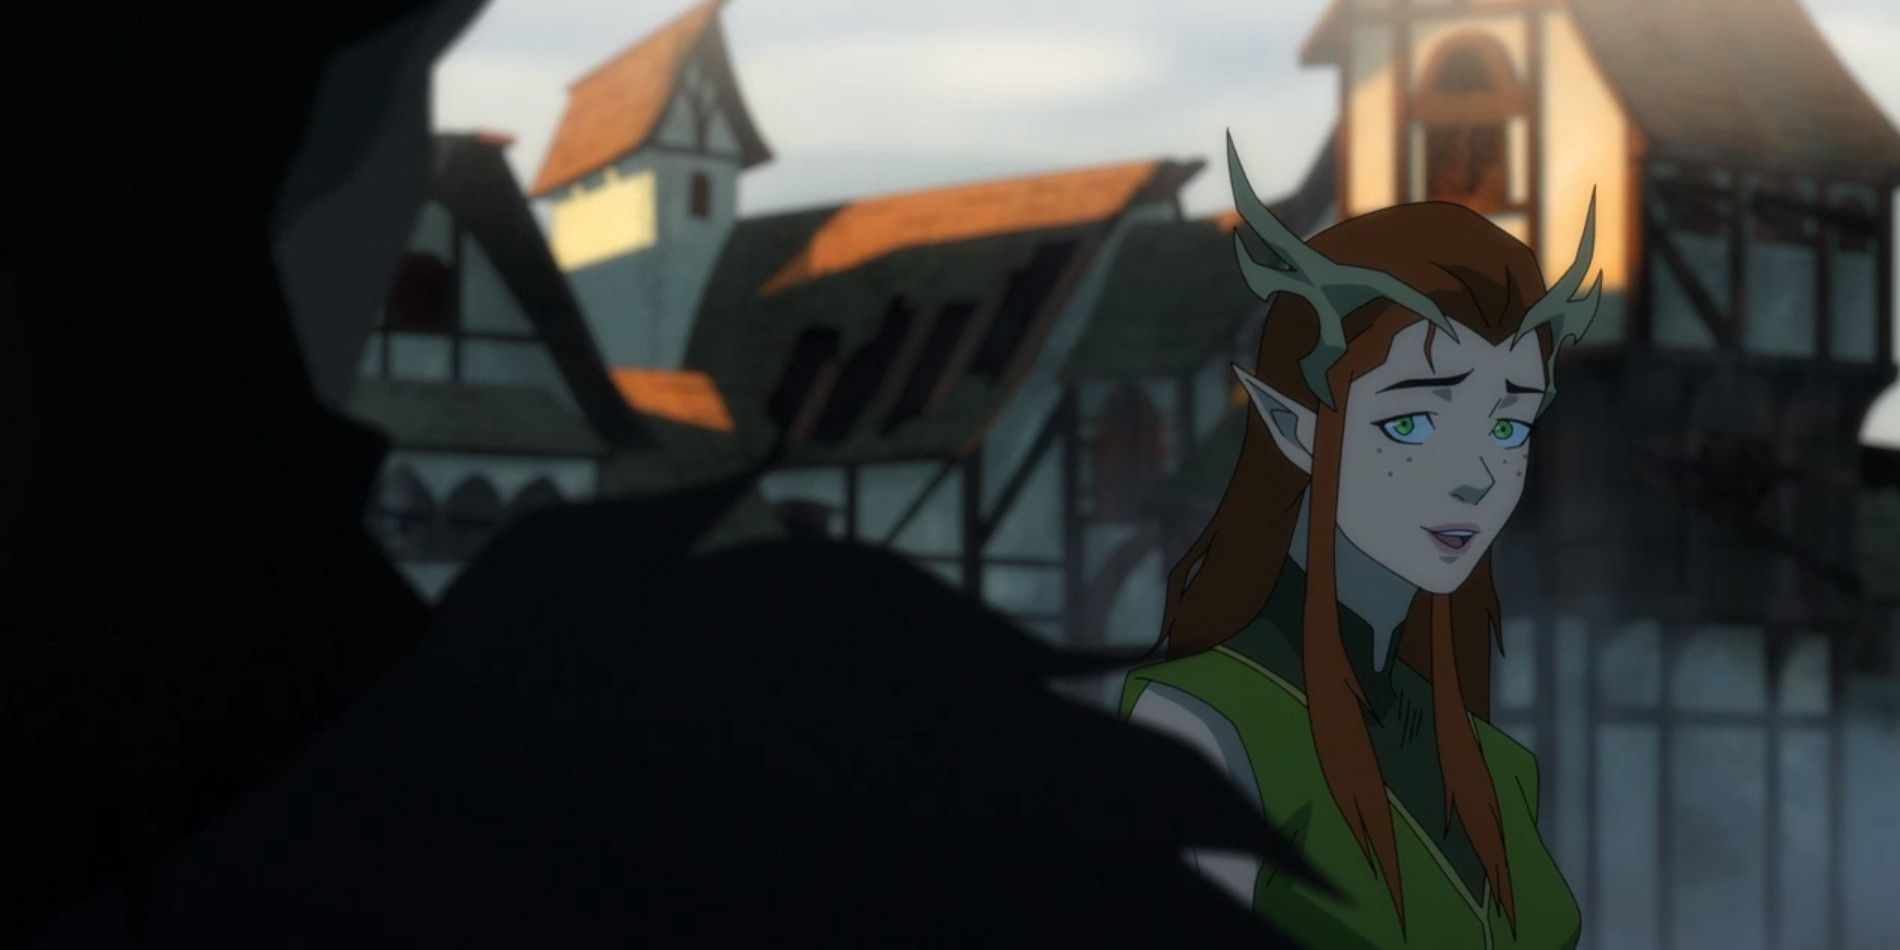 Keyleth looking at Vax in Legend of Vox Machina